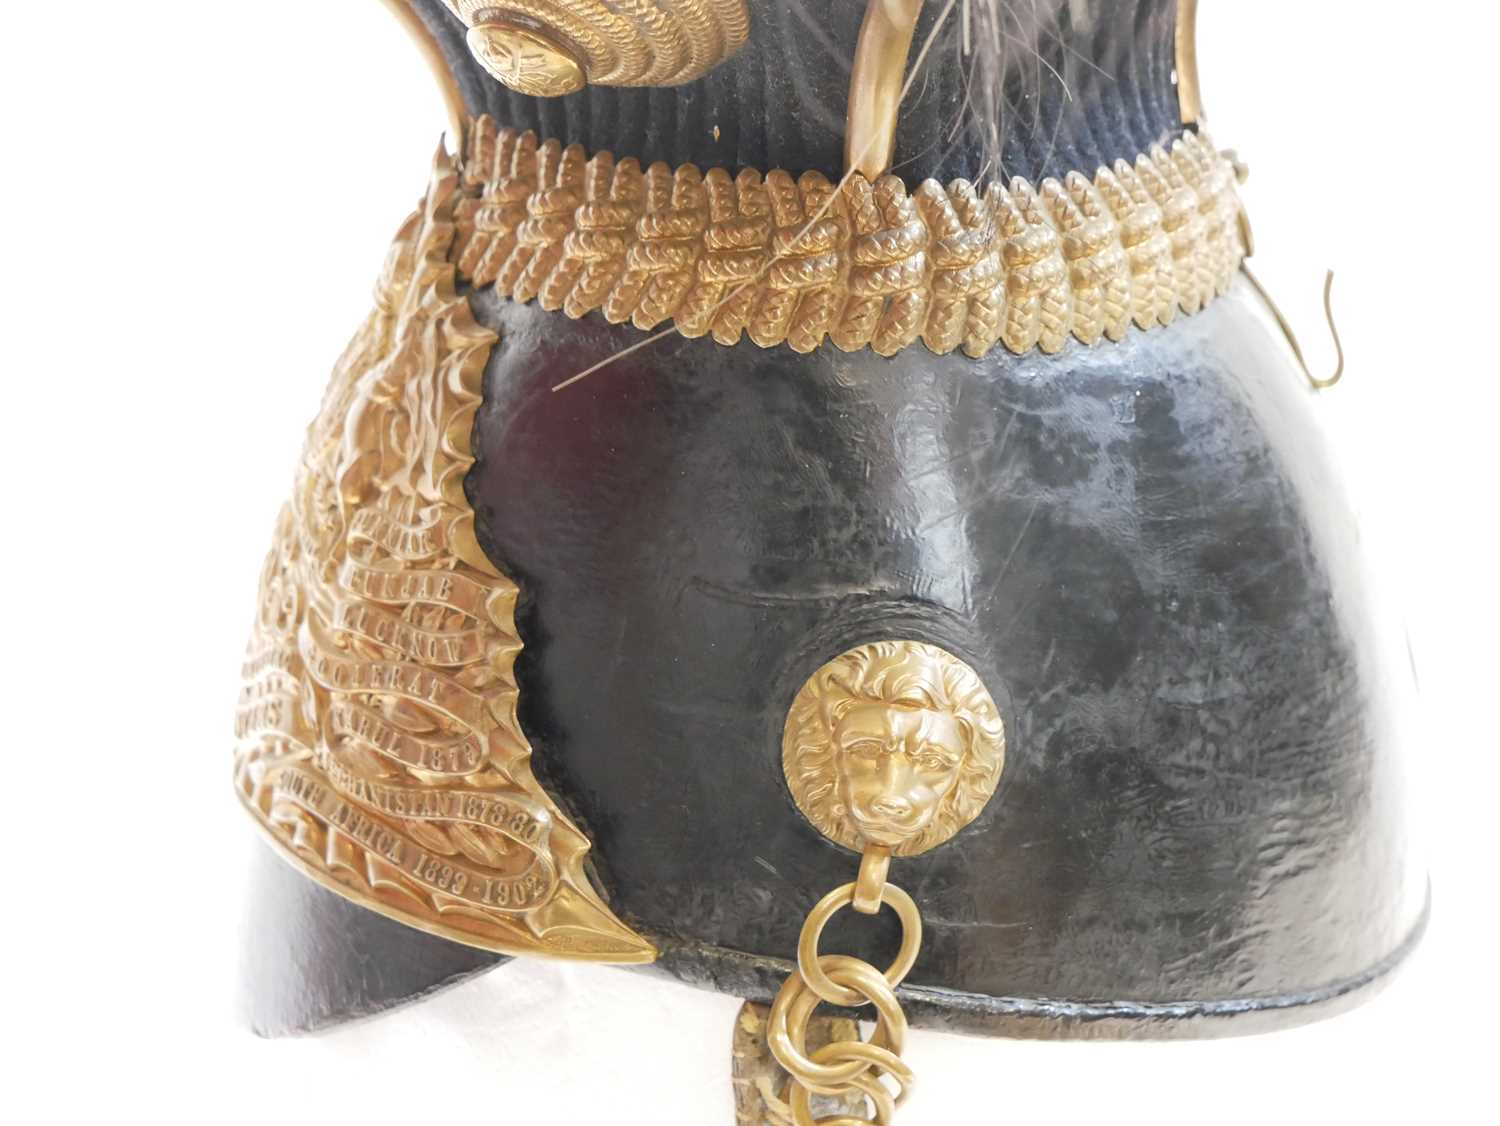 Royal Lancers chapska or helmet, fitted with helmet plate, chinscales, and plume bears remnants of - Image 8 of 14